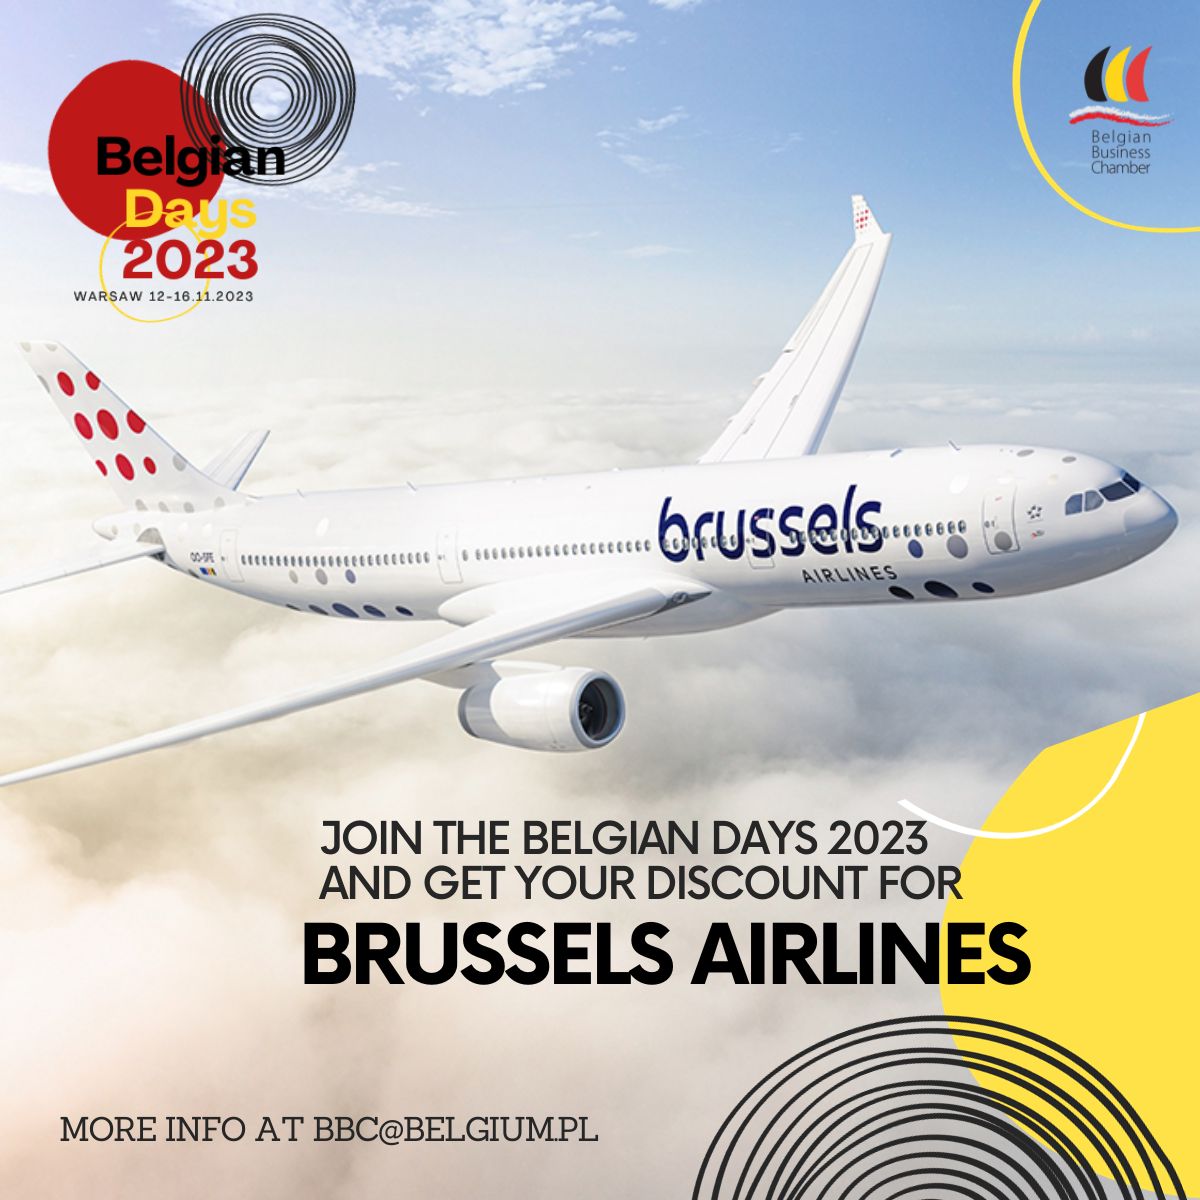 Fly roundtrip from Brussels (BRU) to Warsaw (WAW) at special rate fares with Brussels Airlines for the Belgian Days 2023!